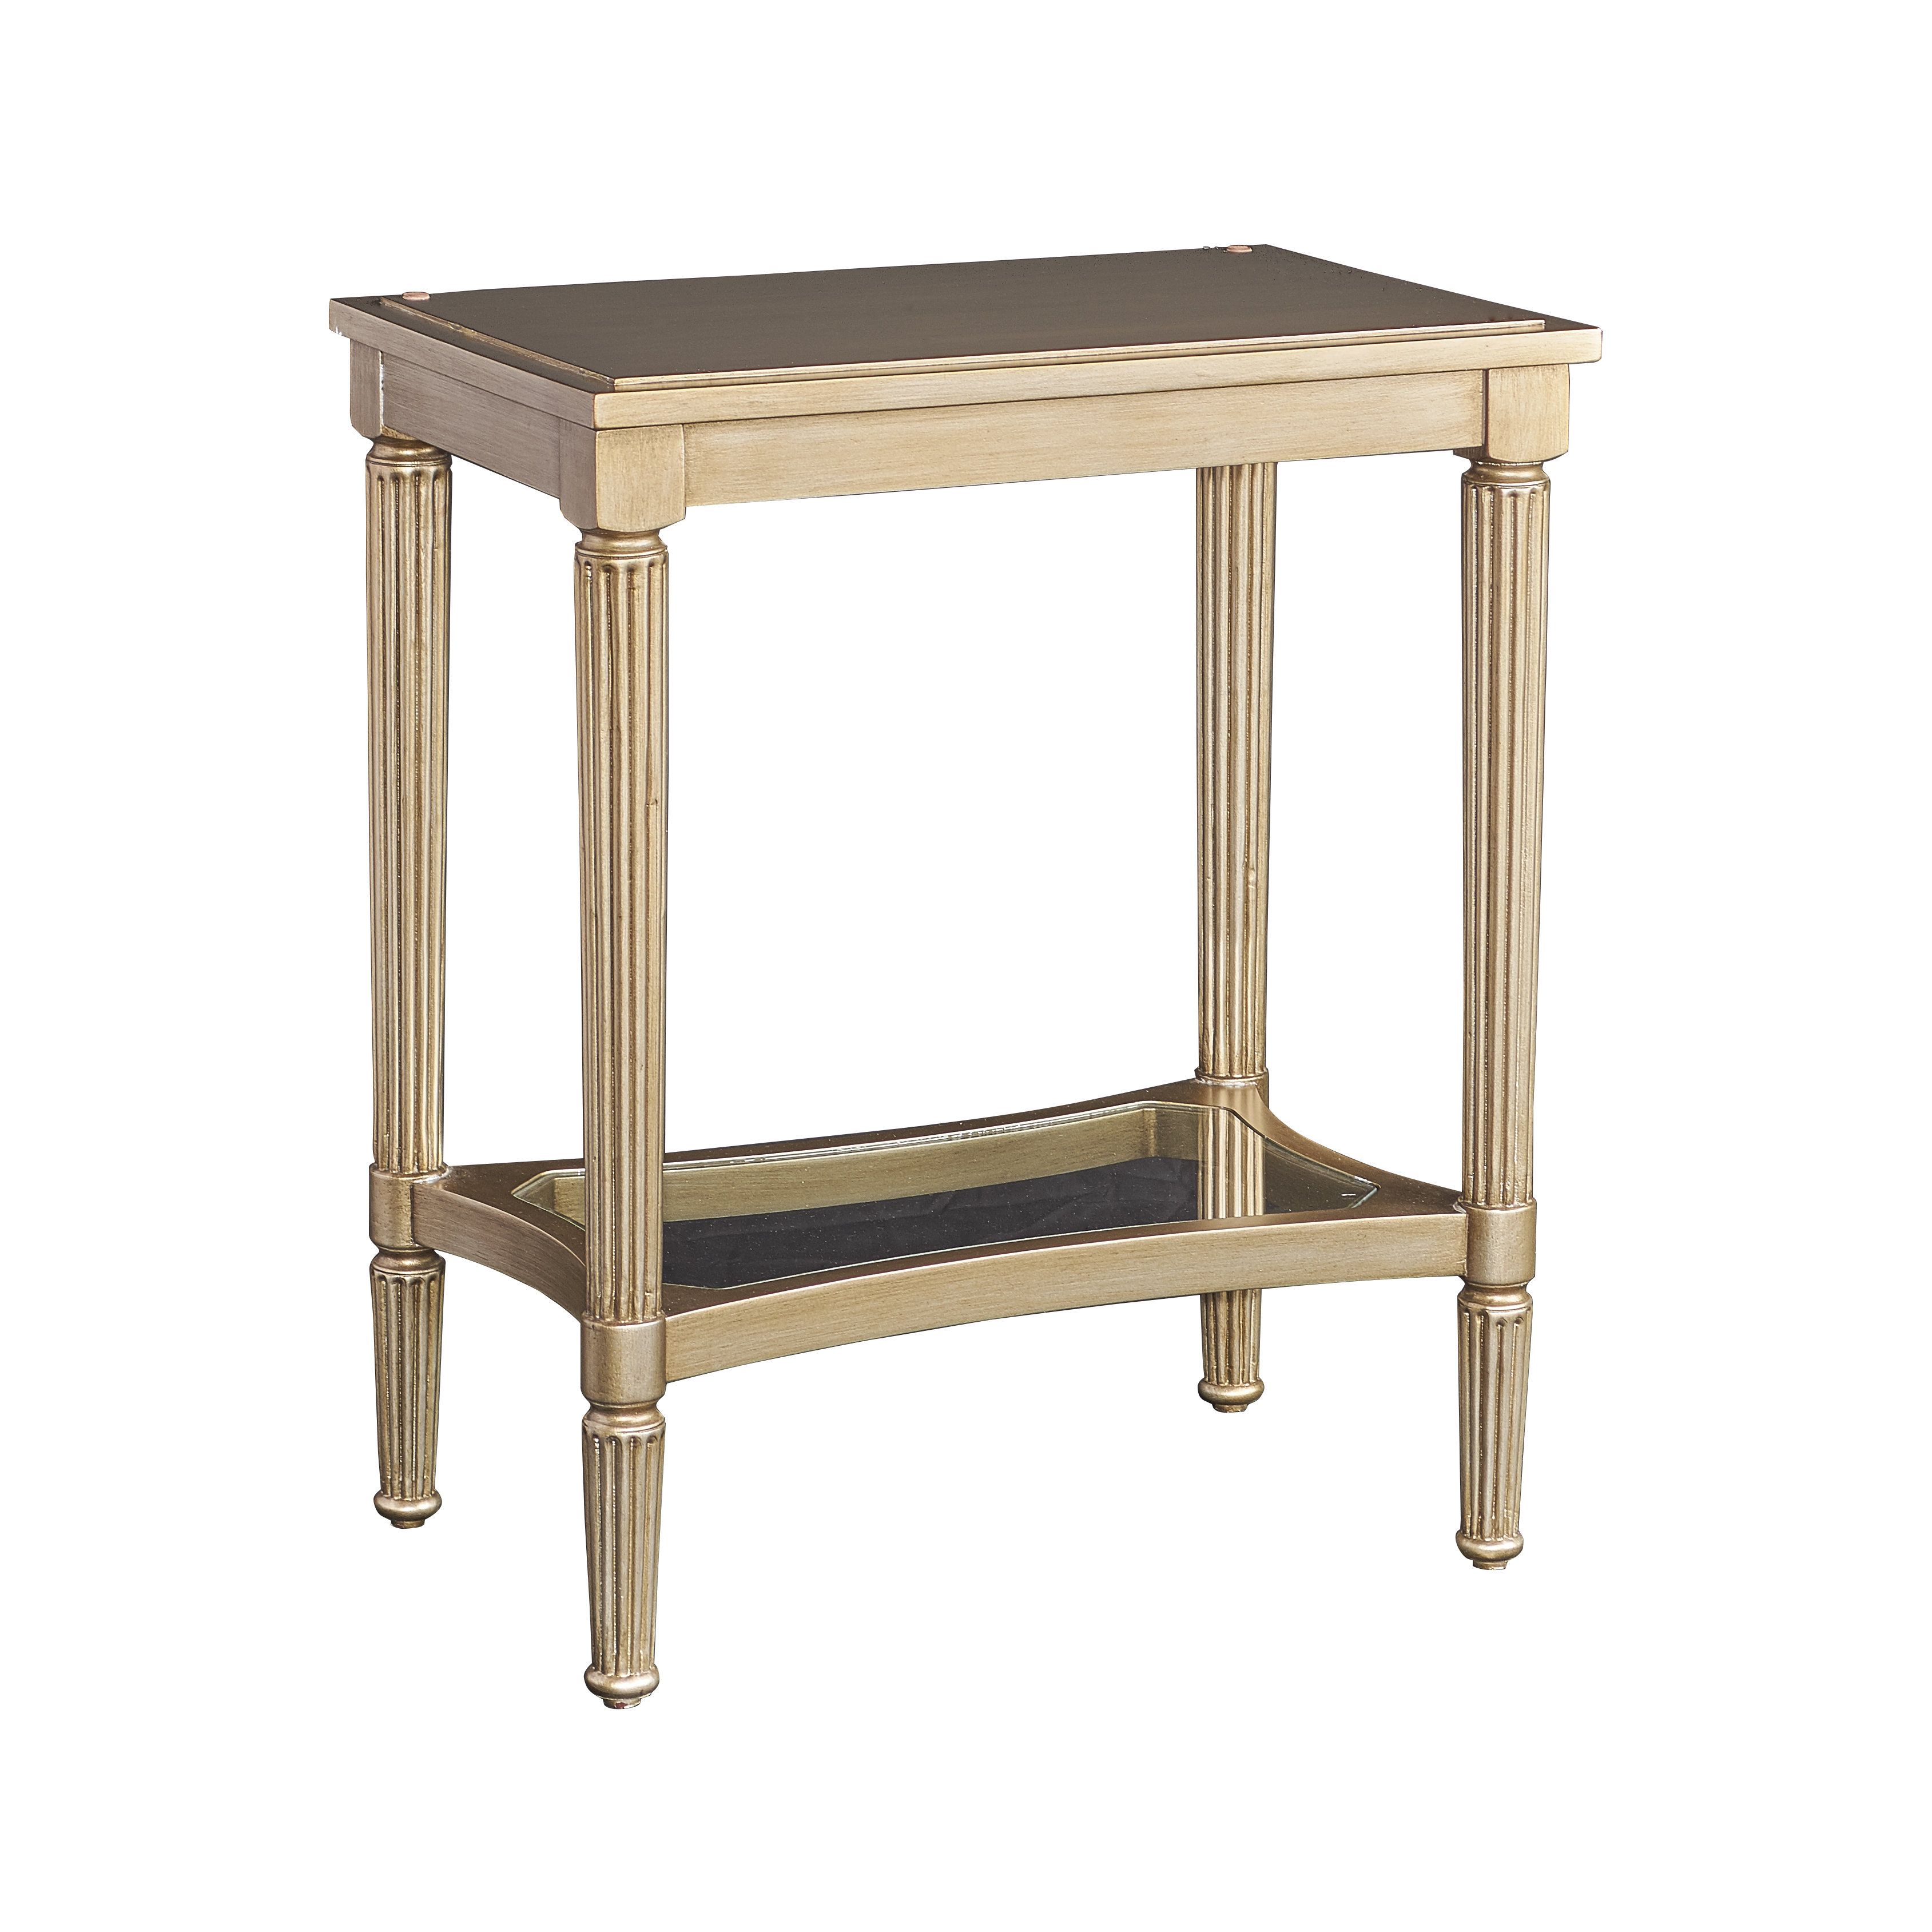 powell masterpiece mia gold wood and mirrored glass serving tray accent table glamour finish round barn counter height dining set smoked side ikea storage shelves with bins